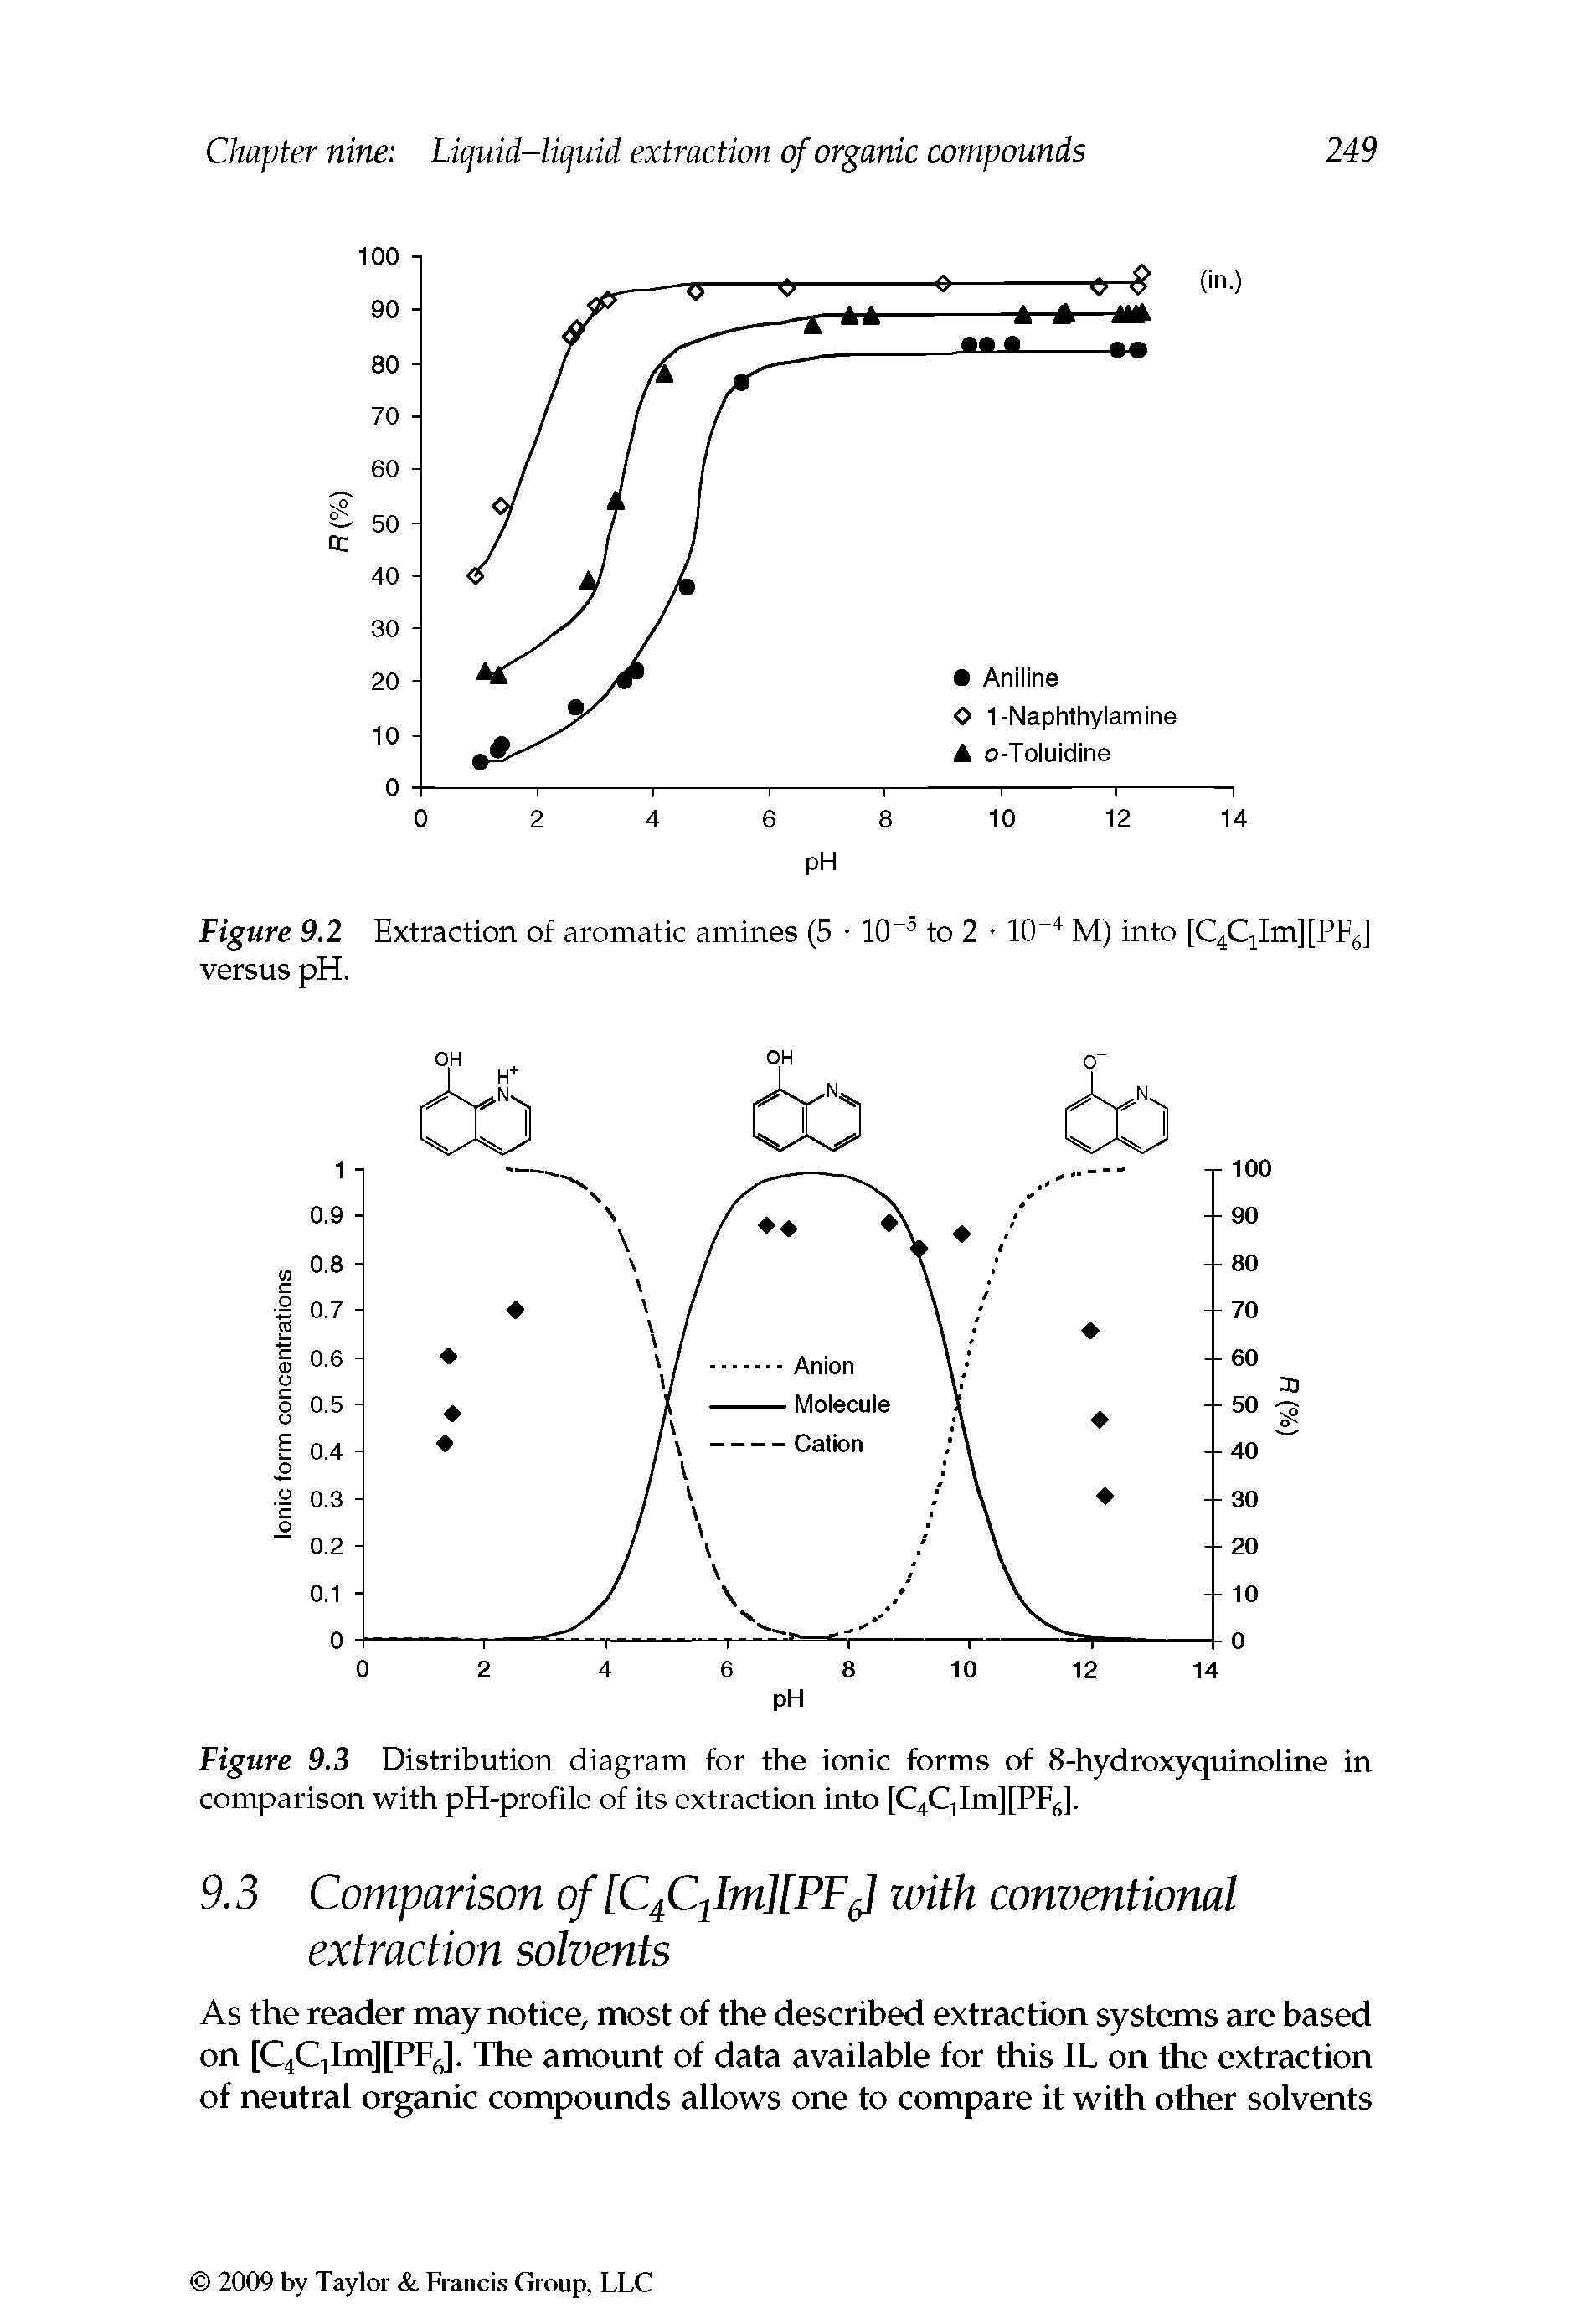 Figure 9.3 Distribution diagram for the ionic forms of 8-hydroxyquinoline in comparison with pH-profile of its extraction into [C4CjIm][Pp5].